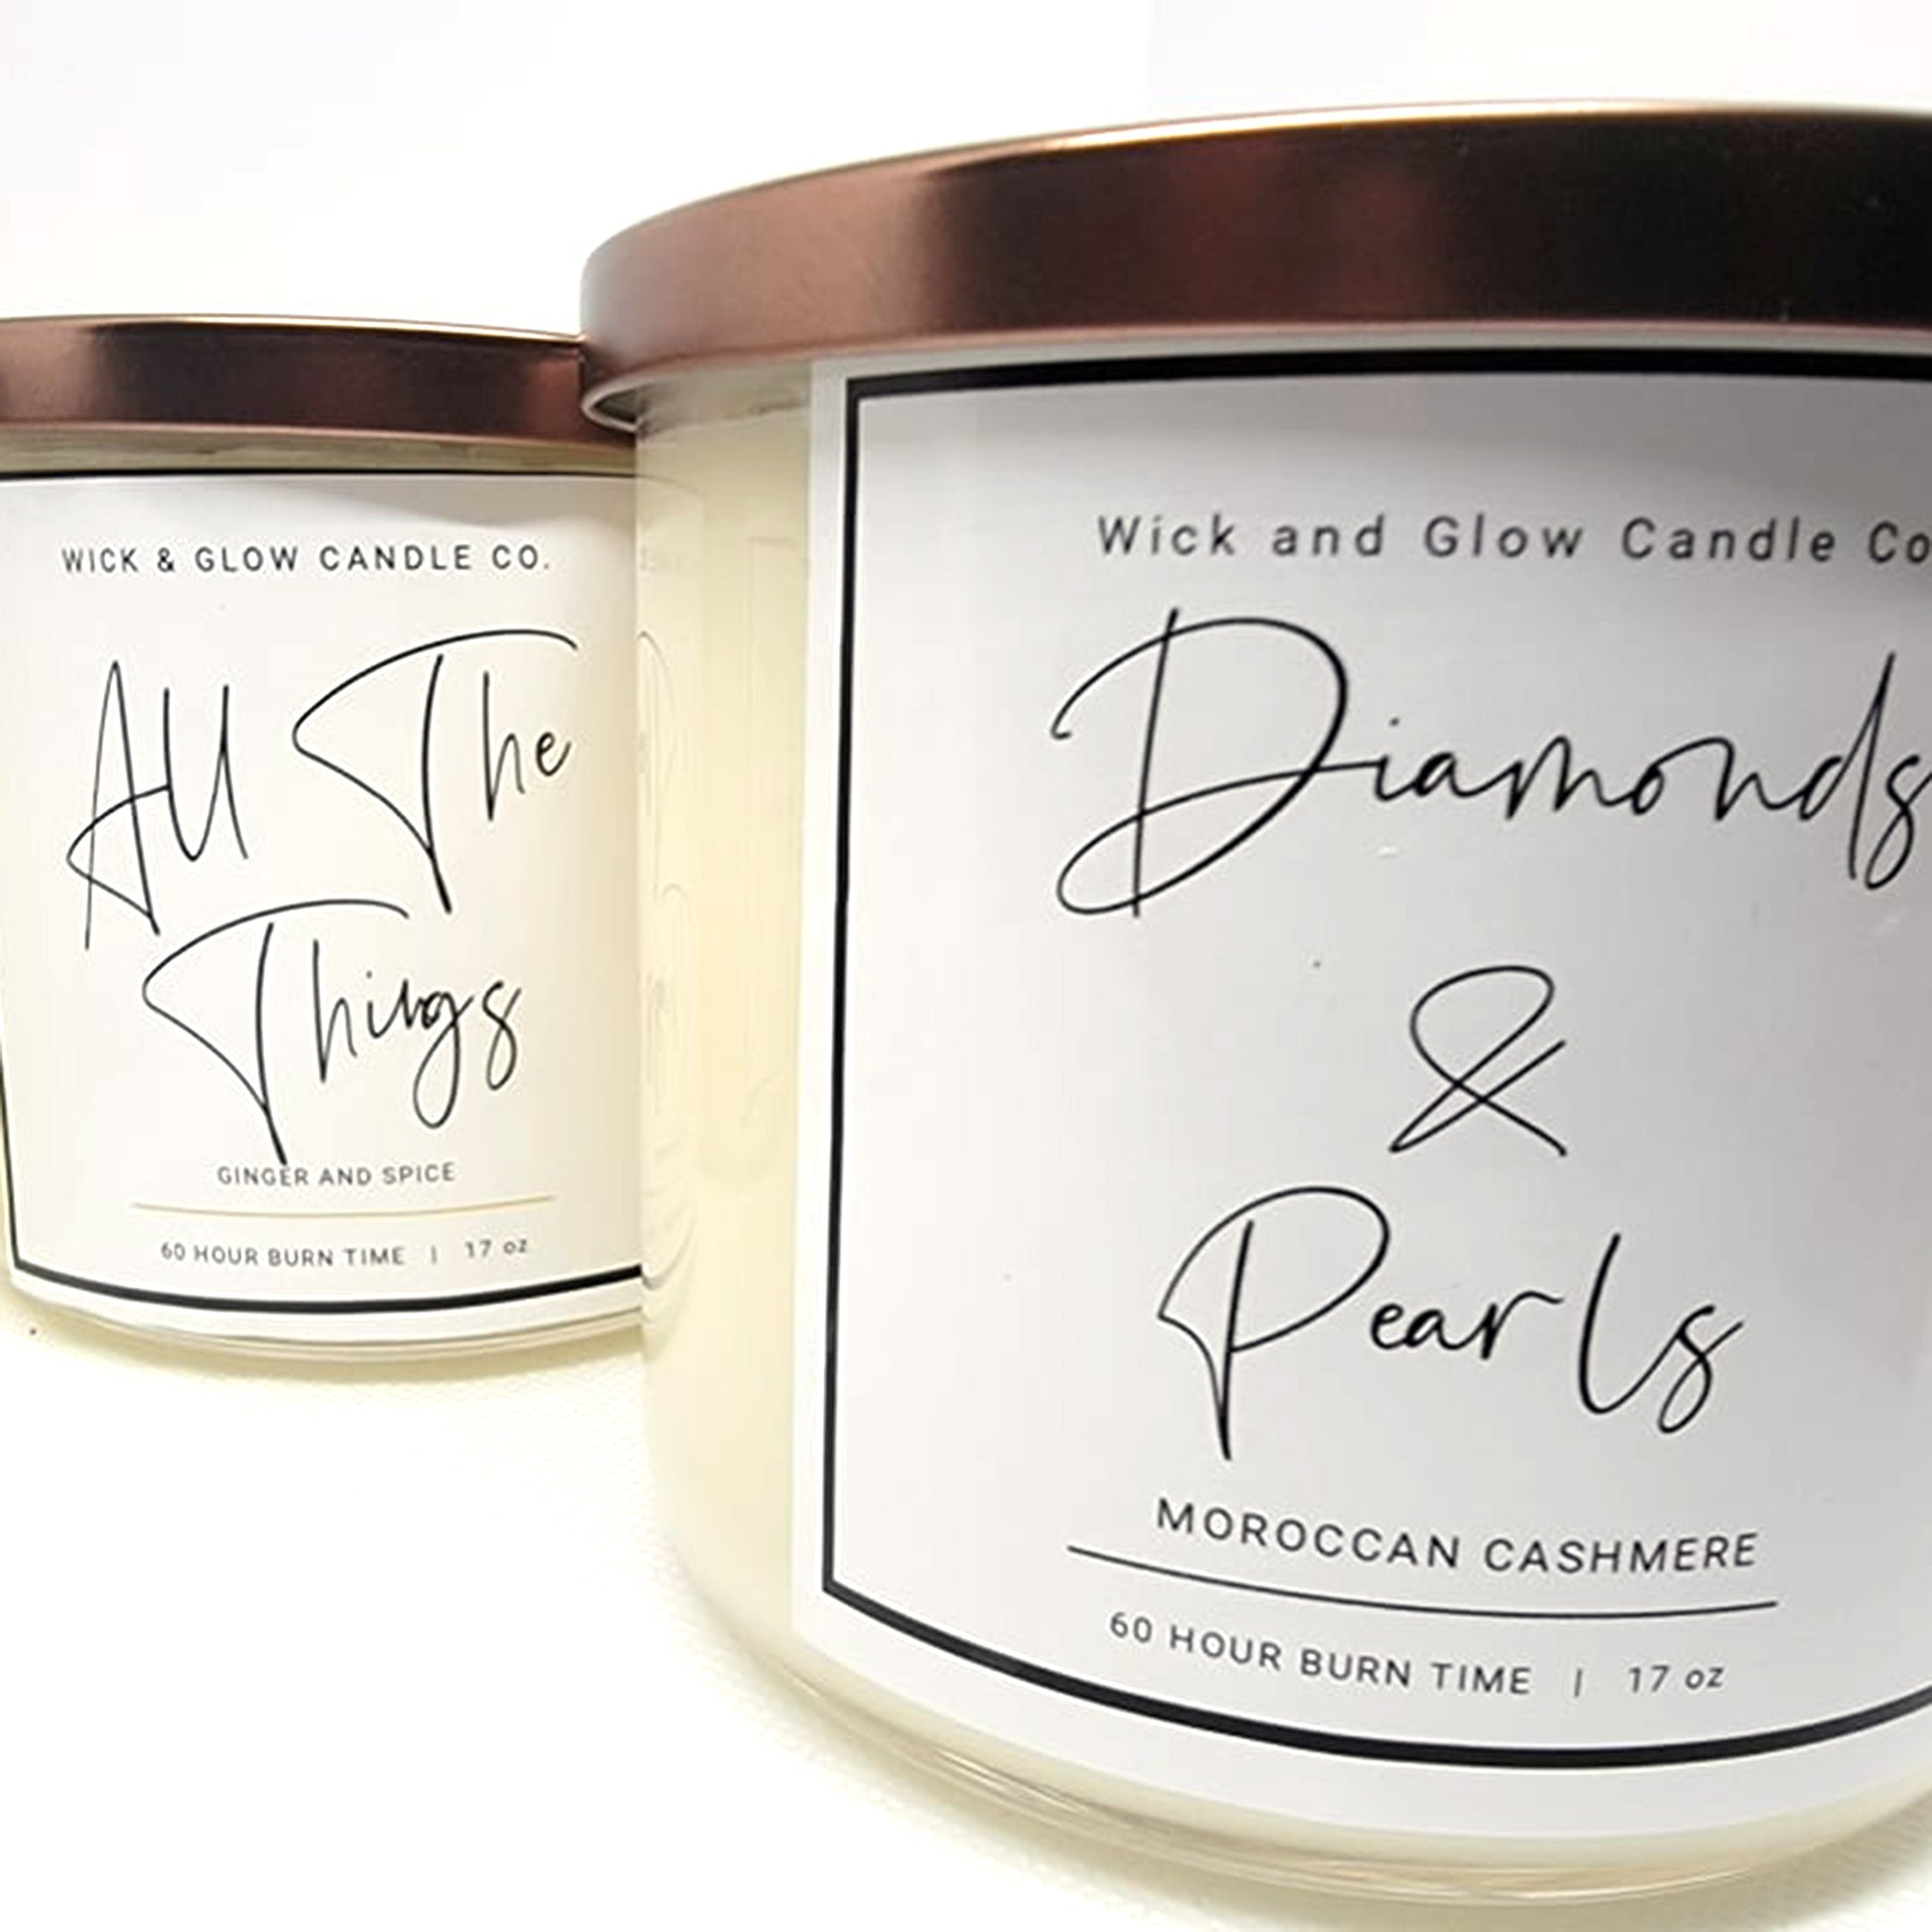 Diamonds and Pearls Moroccan Cashmere Luxury Scented Candle (3 wick) - The Wick and Glow Candle Company